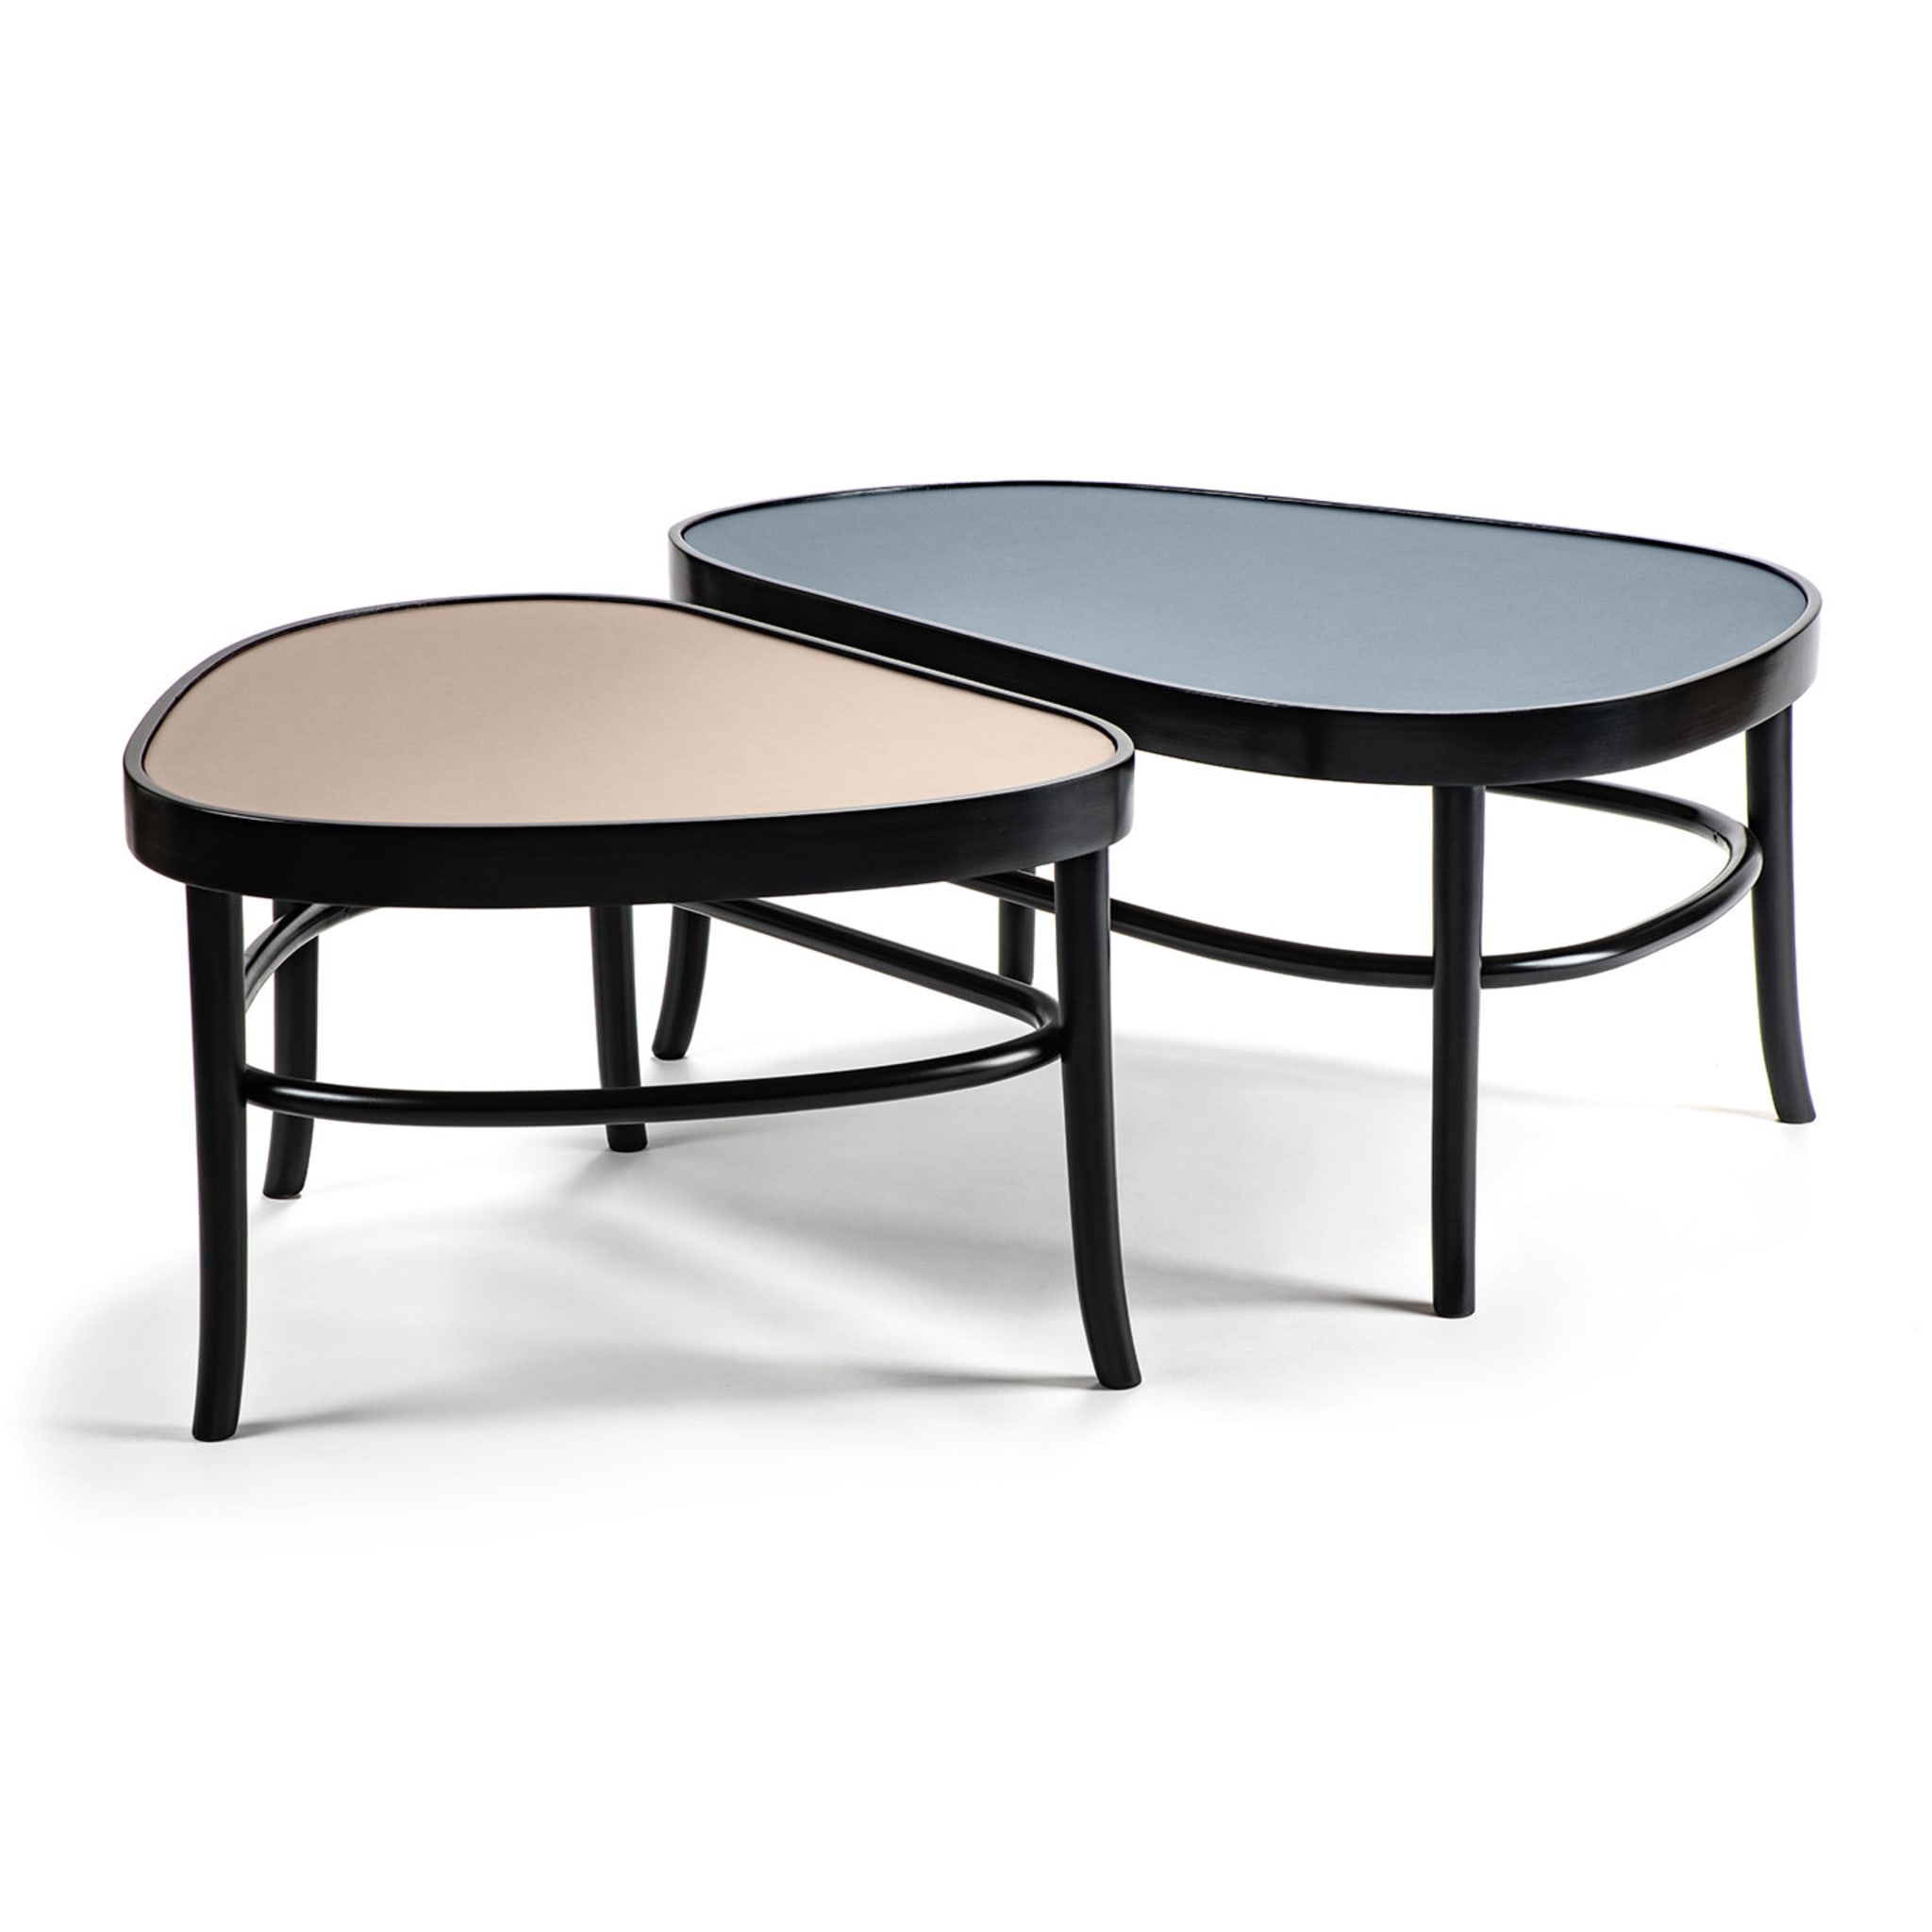 Small Peers Coffee Table by Front - Alternative view 3